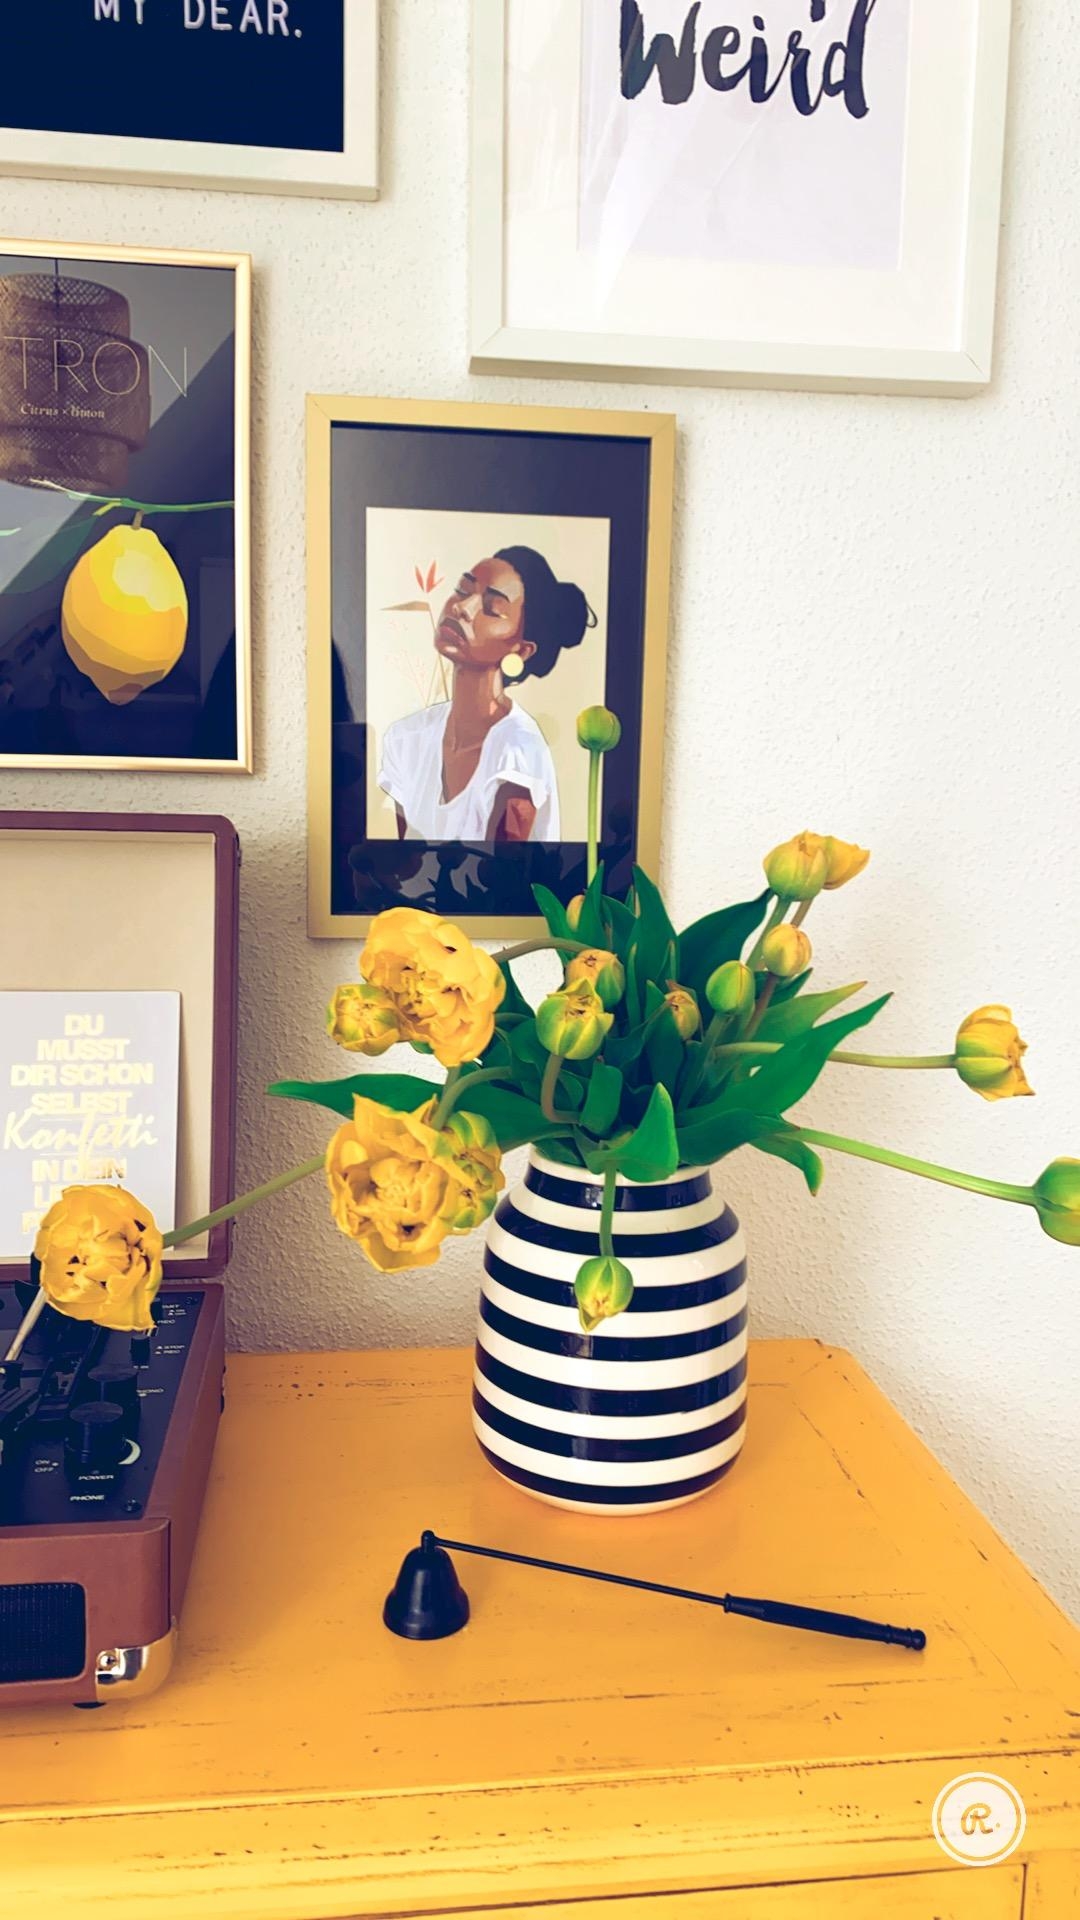 One of my favourite corners...! Women are so full of strong energy. Love it. ❤️#woman#living#flowers#beauty#grateful#yellow